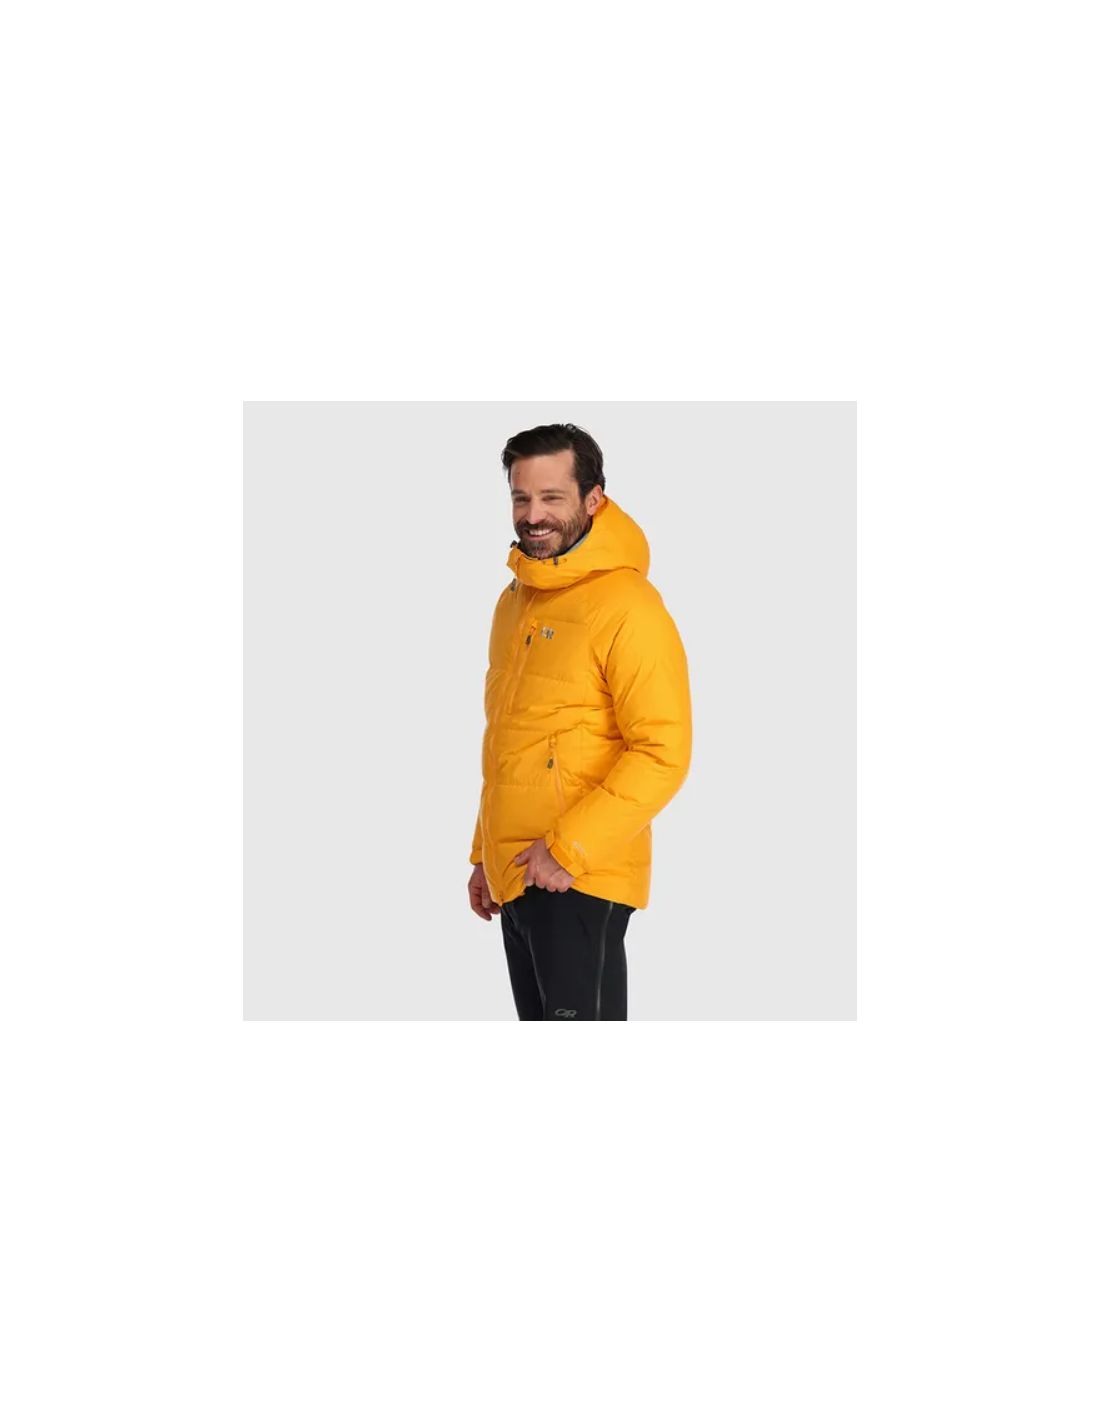 Parka grand froid homme